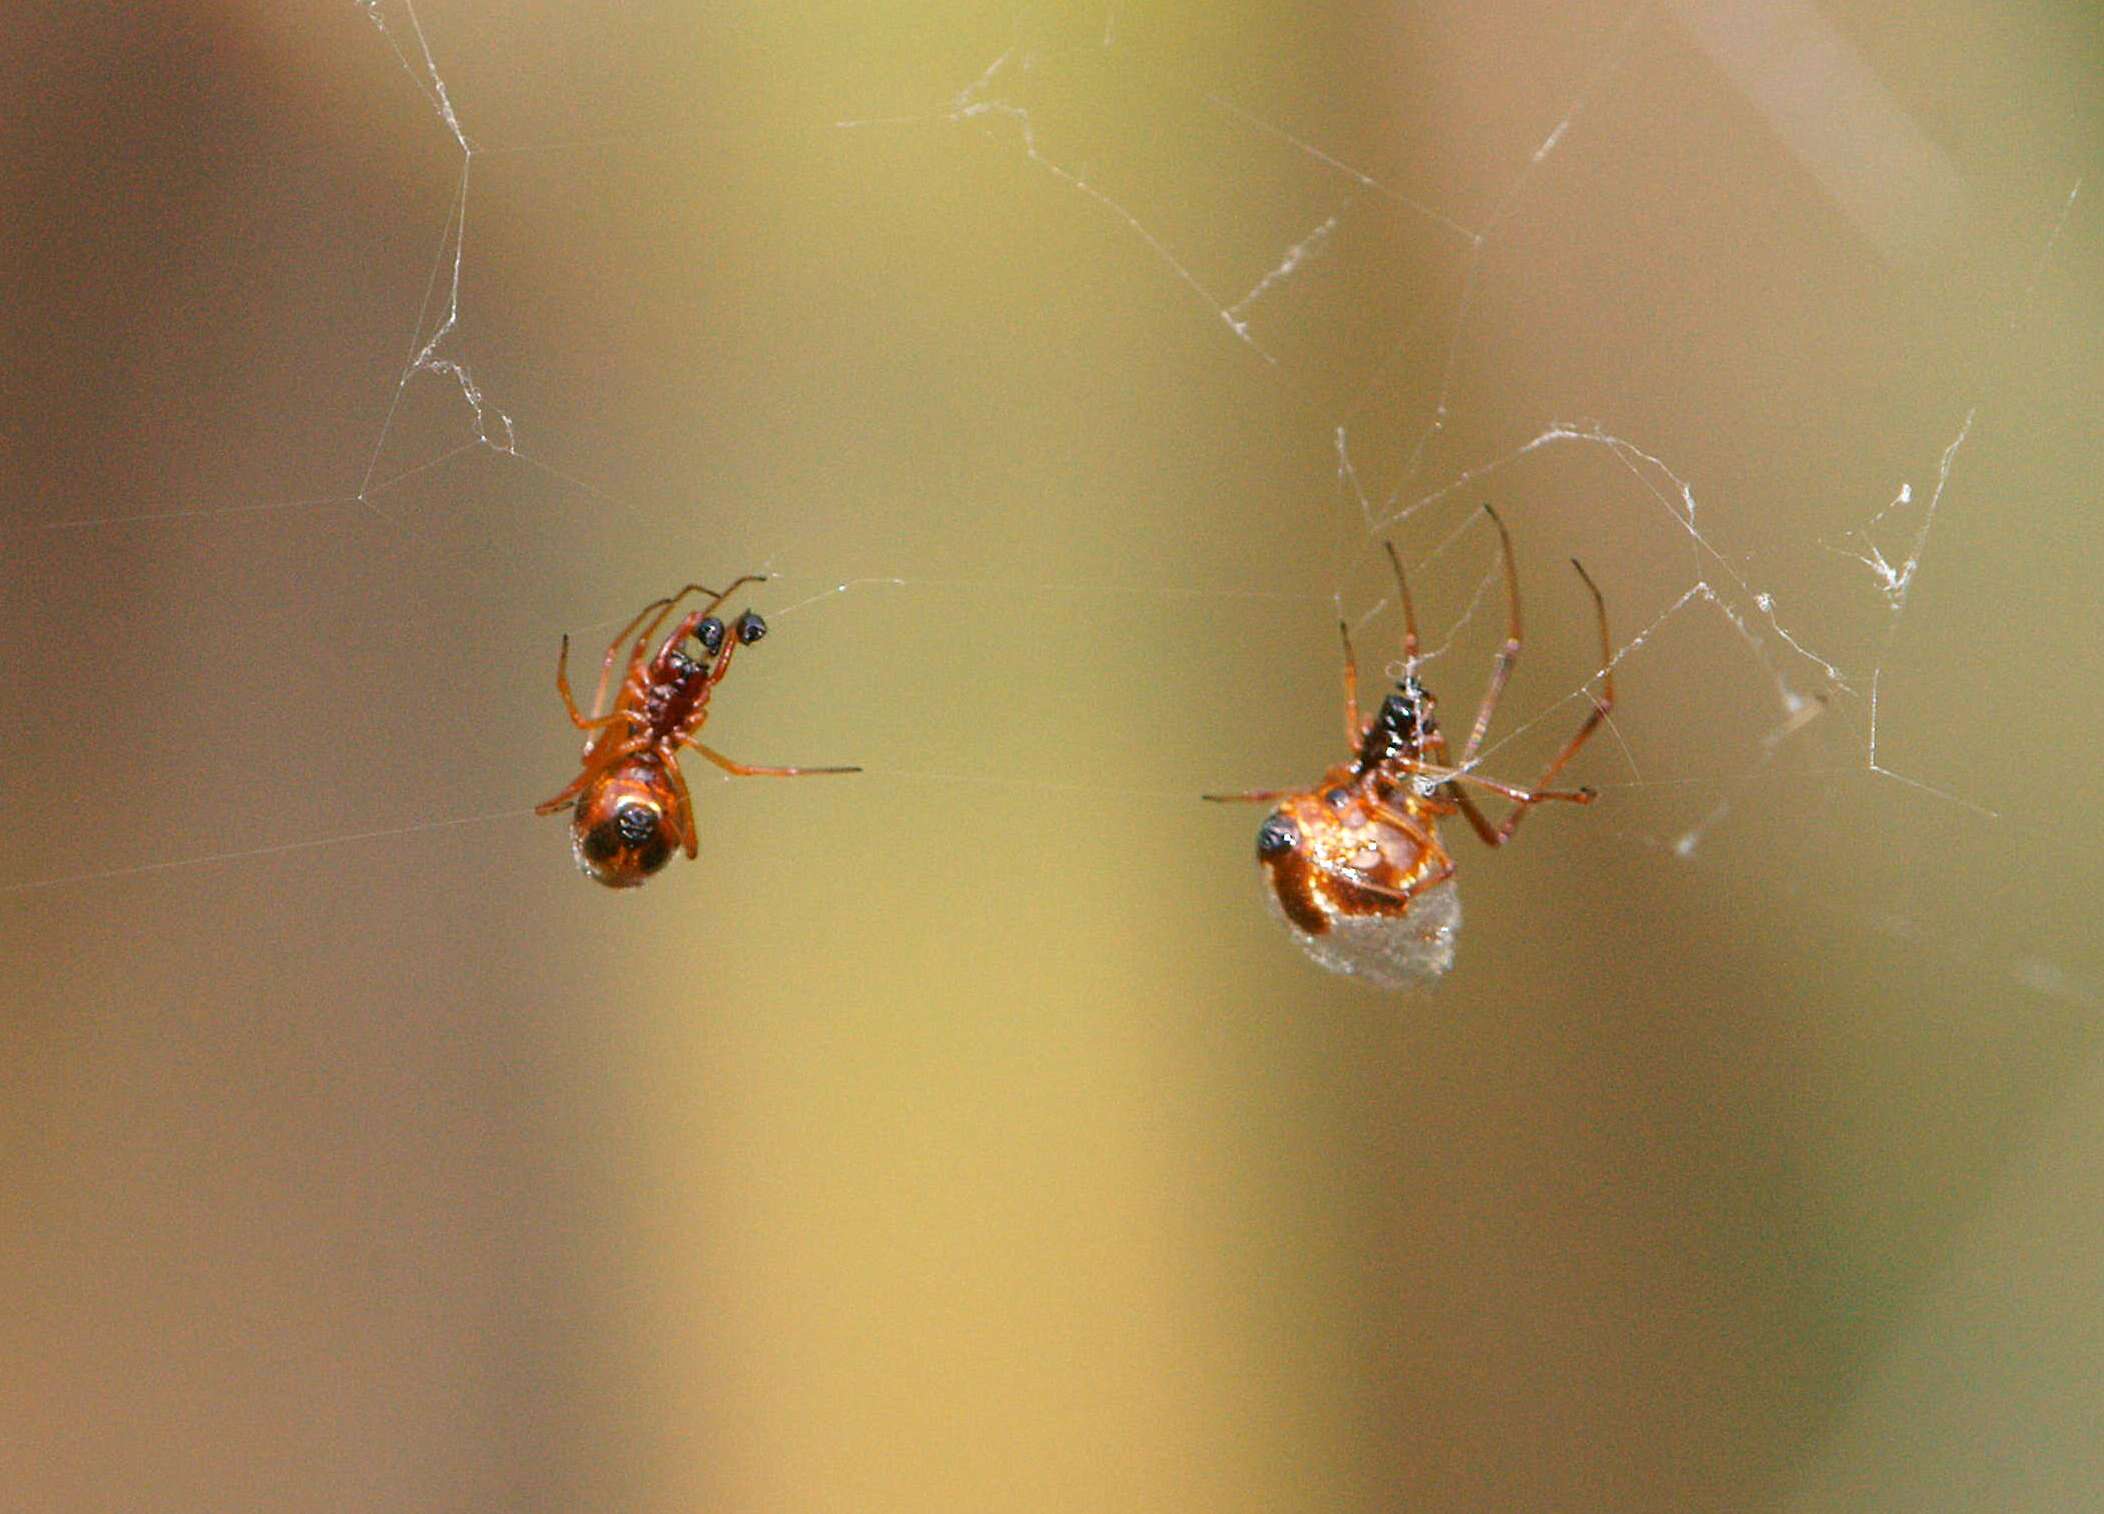 Image of tangle web spiders